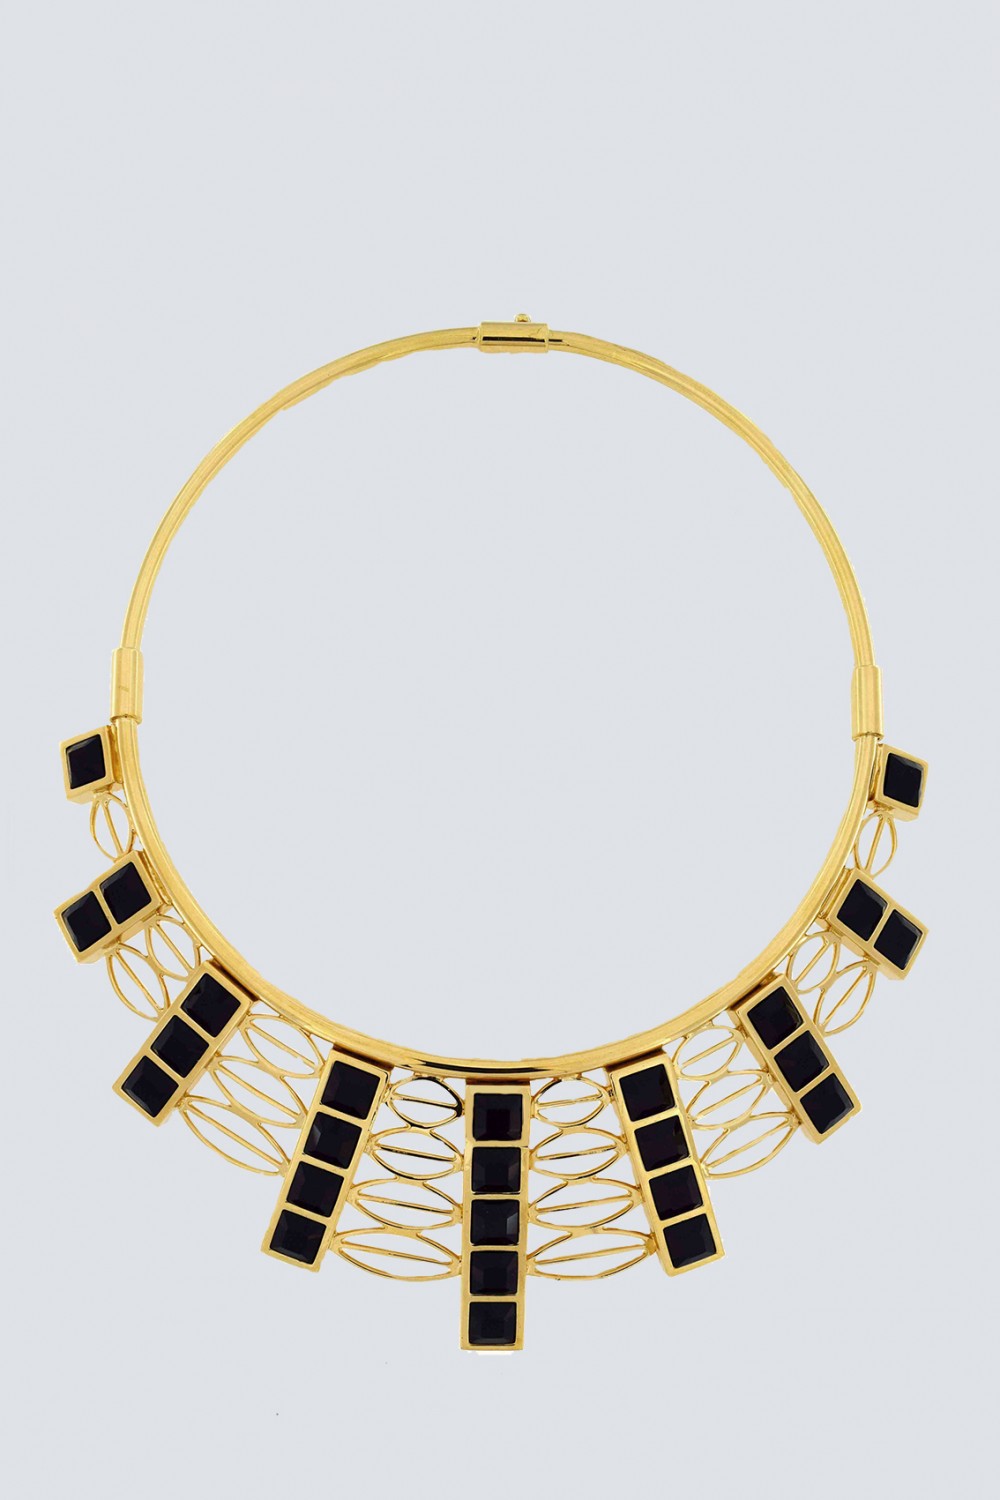 Necklace with gold and black Swarovski